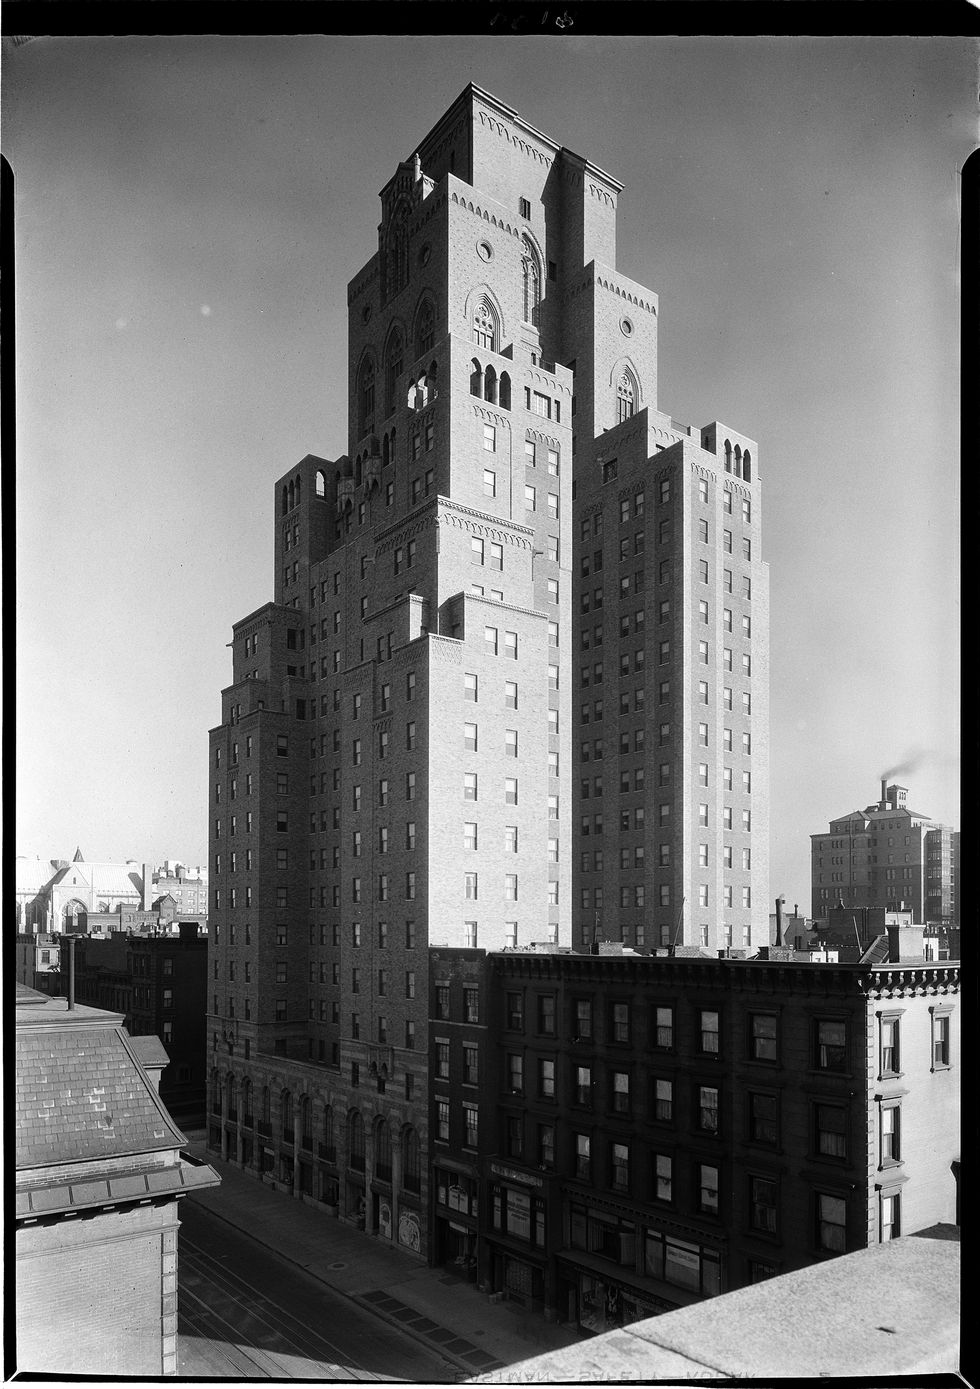 united states   january 03  the barbizon was a residence hotel for women that was located on 63rd street and lexington avenue barbizon hotel new york, ny  photo by mcnygottscho schleisnergetty images